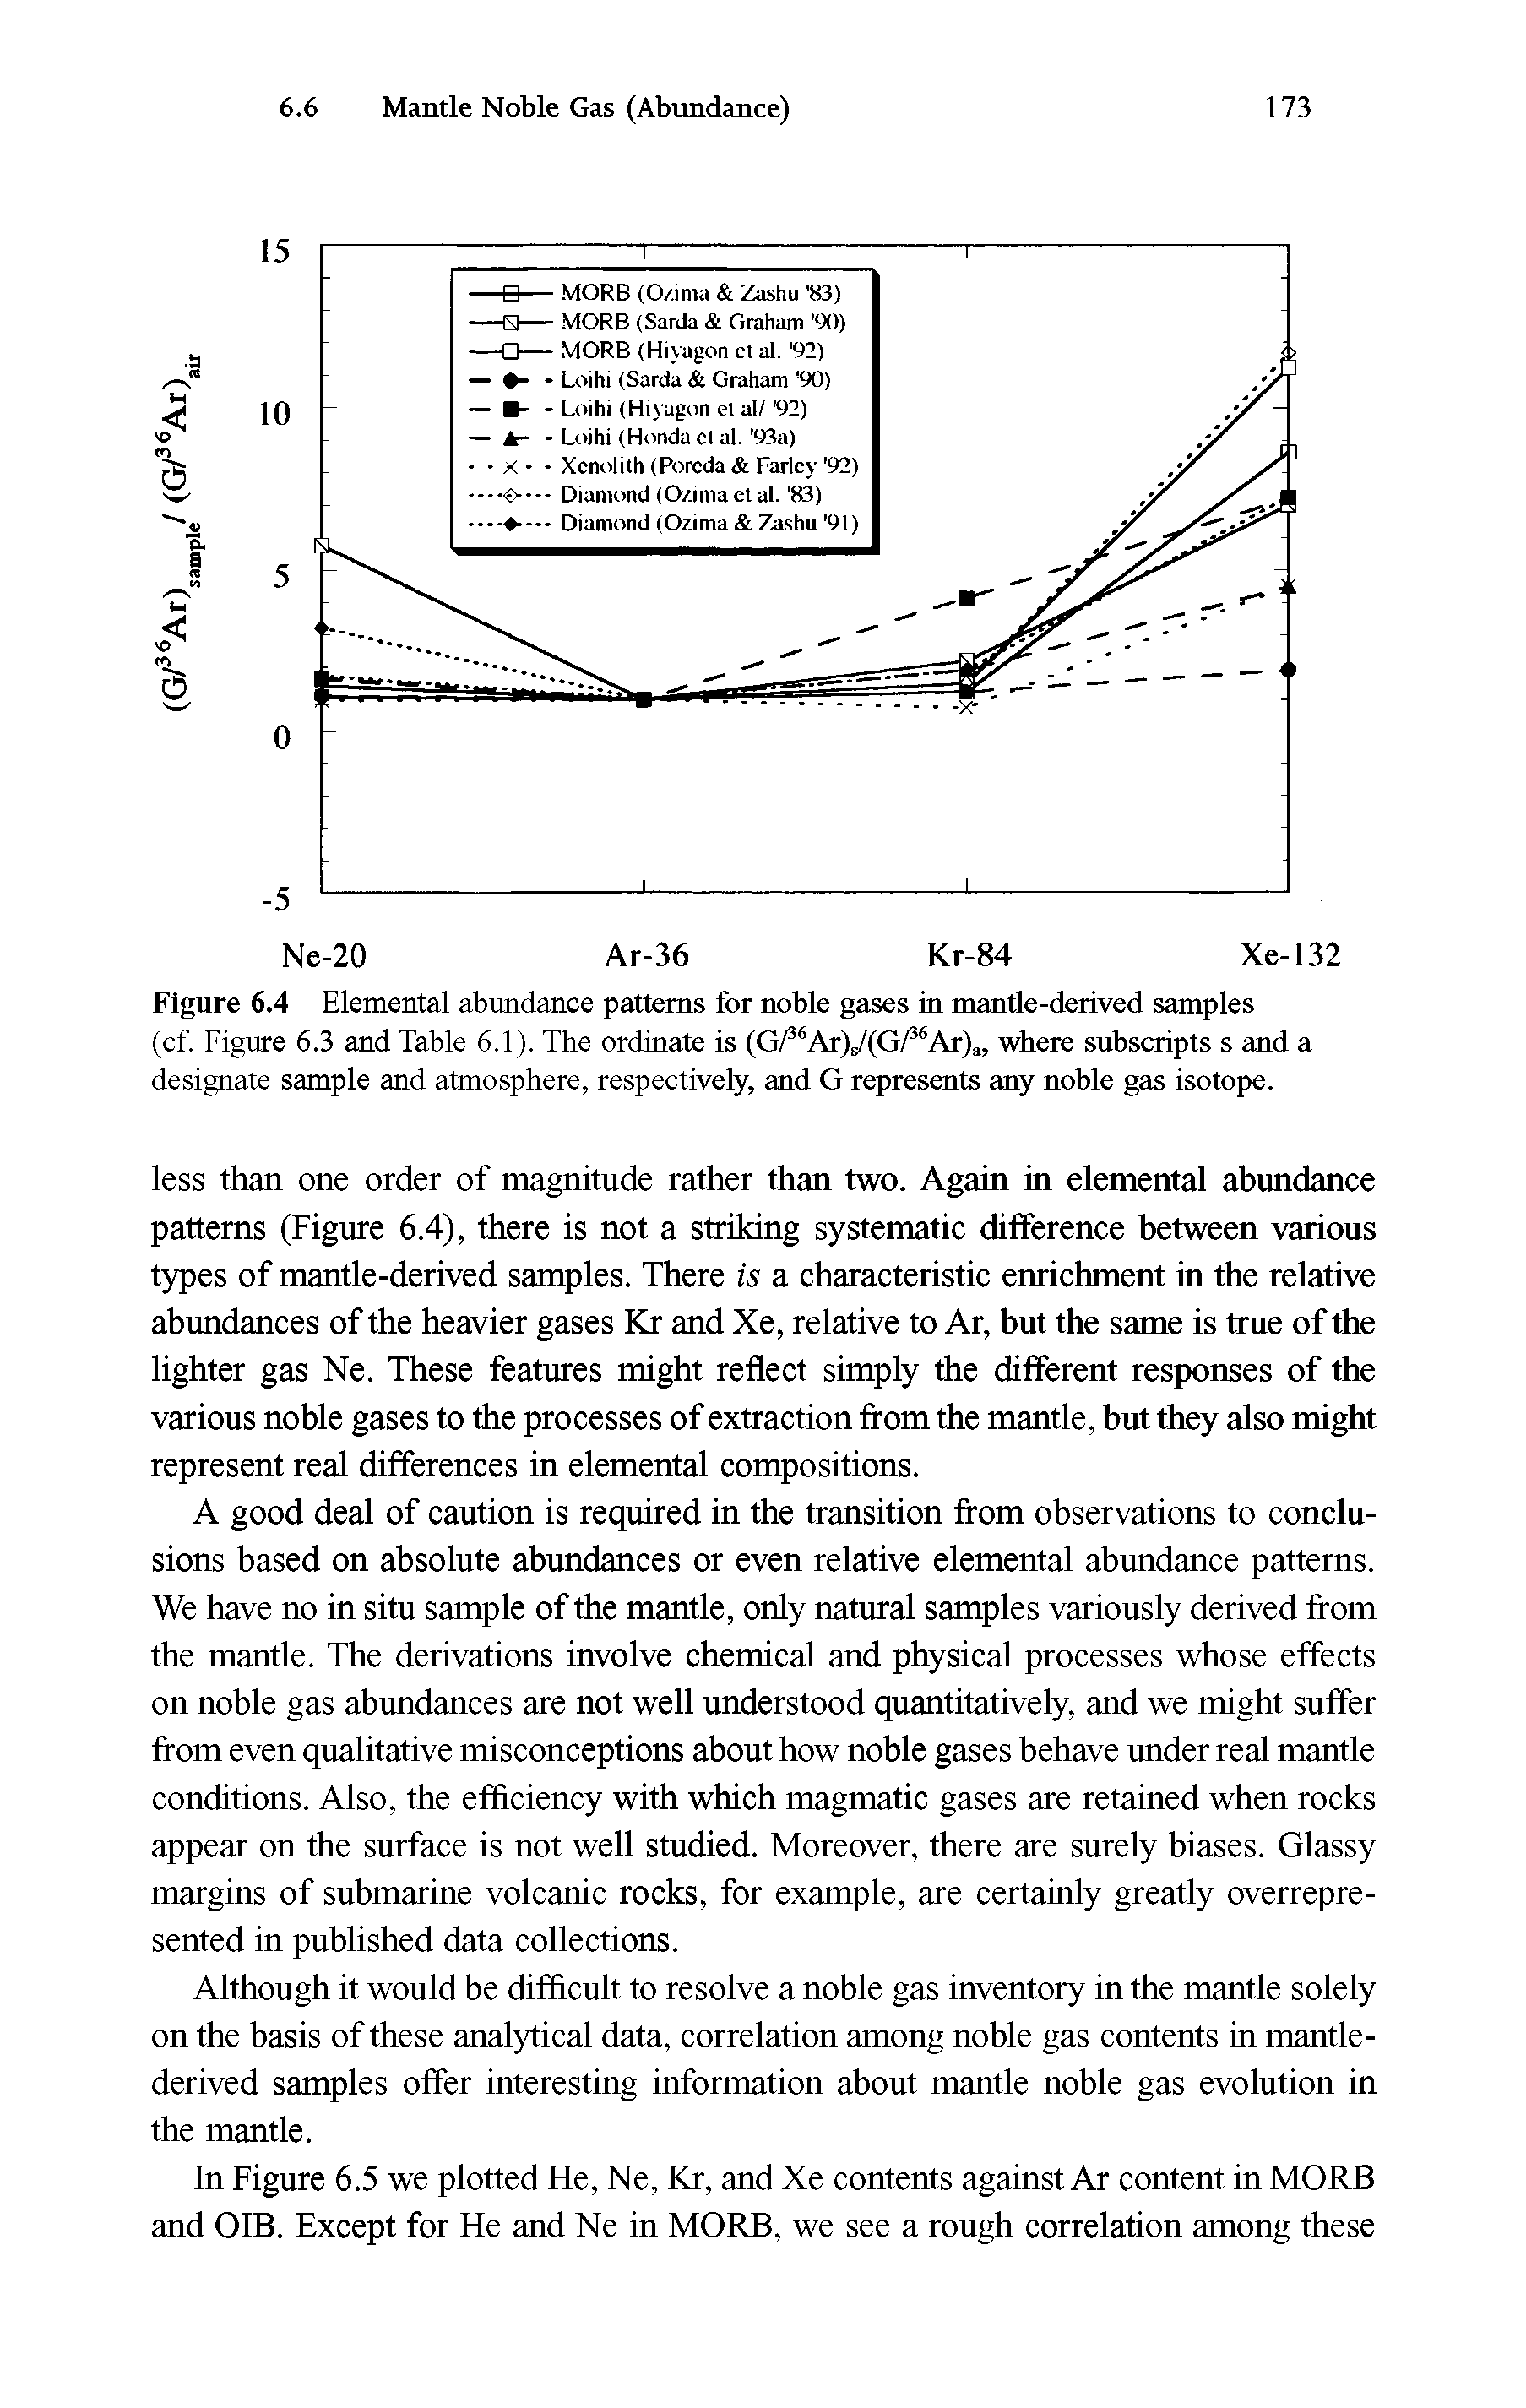 Figure 6.4 Elemental abundance patterns for noble gases in mantle-derived samples (cf. Figure 6.3 and Table 6.1). The ordinate is (G/36Ar)s/(G/36Ar)a, where subscripts s and a designate sample and atmosphere, respectively, and G represents any noble gas isotope.